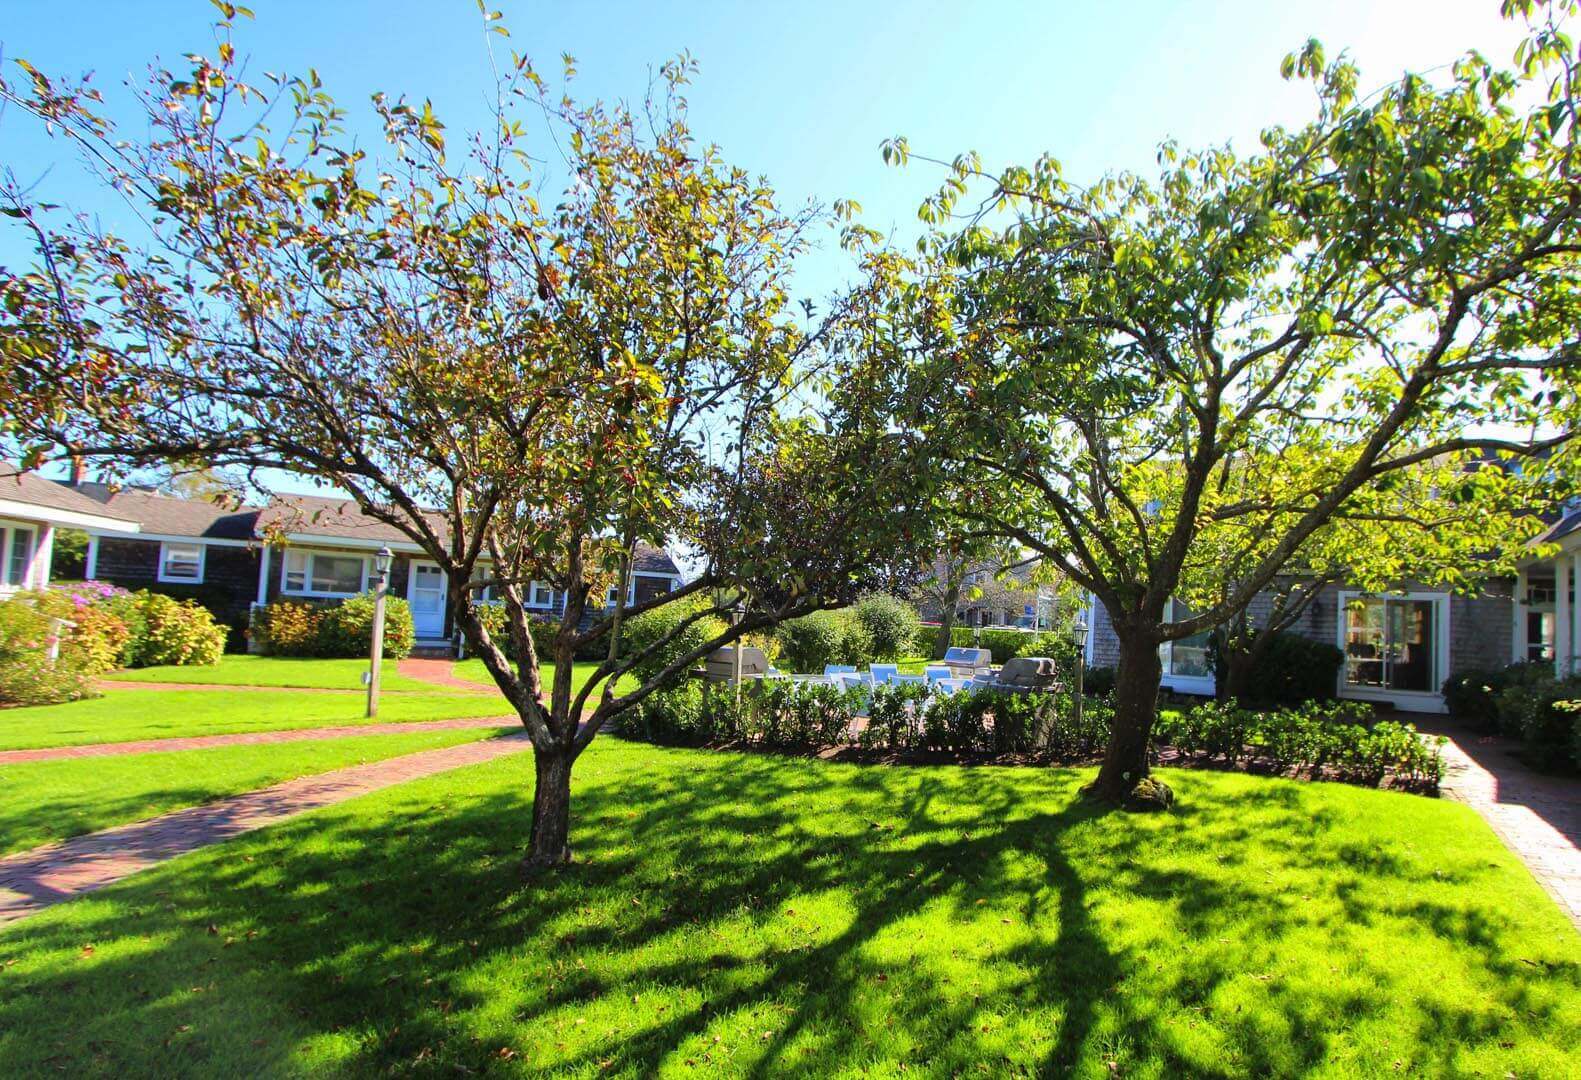 A scenic view of the patio area at VRI's Brant Point Courtyard in Massachusetts.